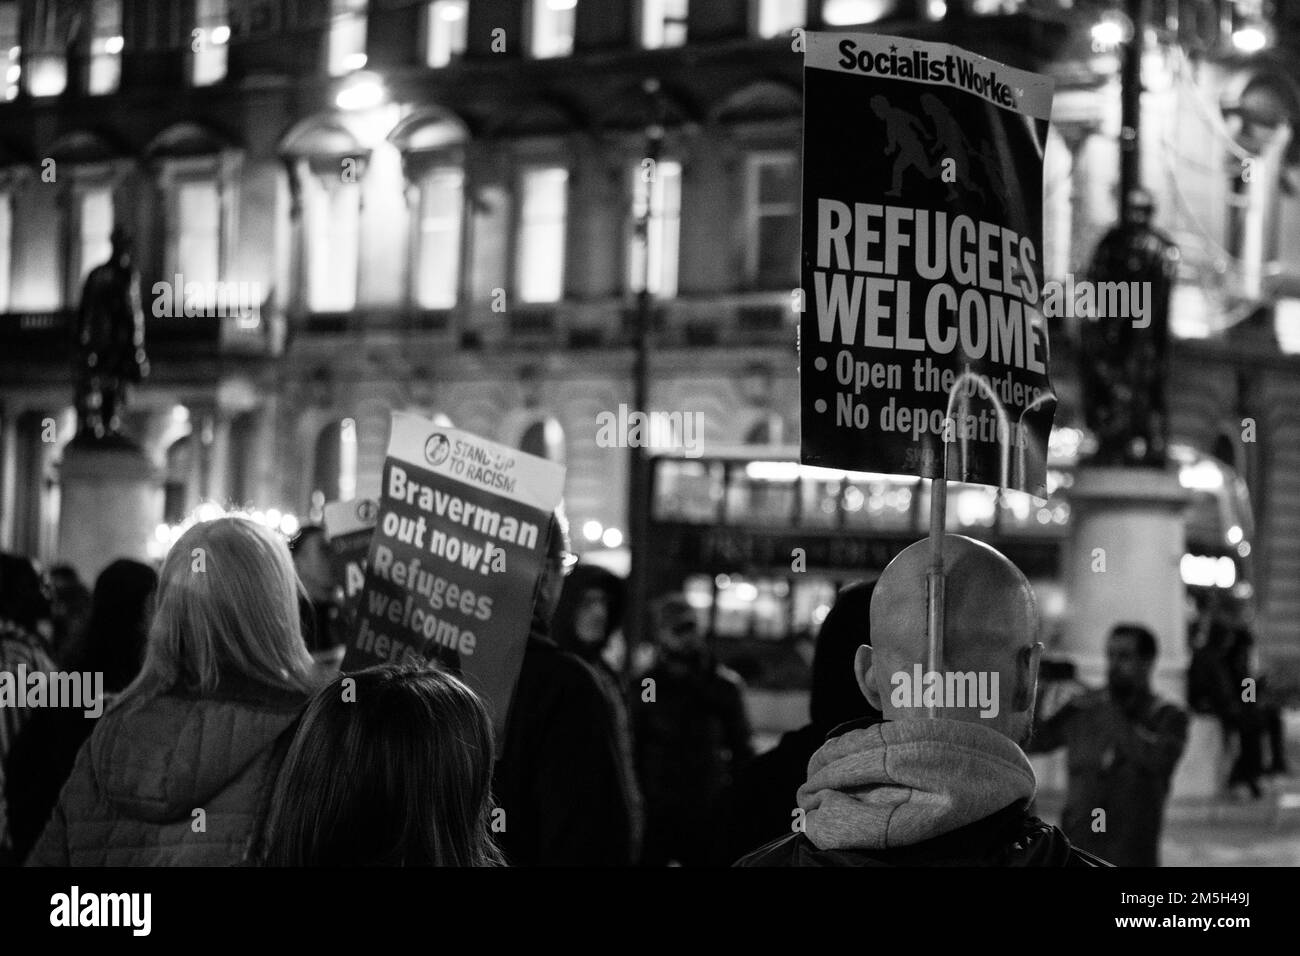 Images from Refugees Welcome event held in George Square Glasgow Stock Photo